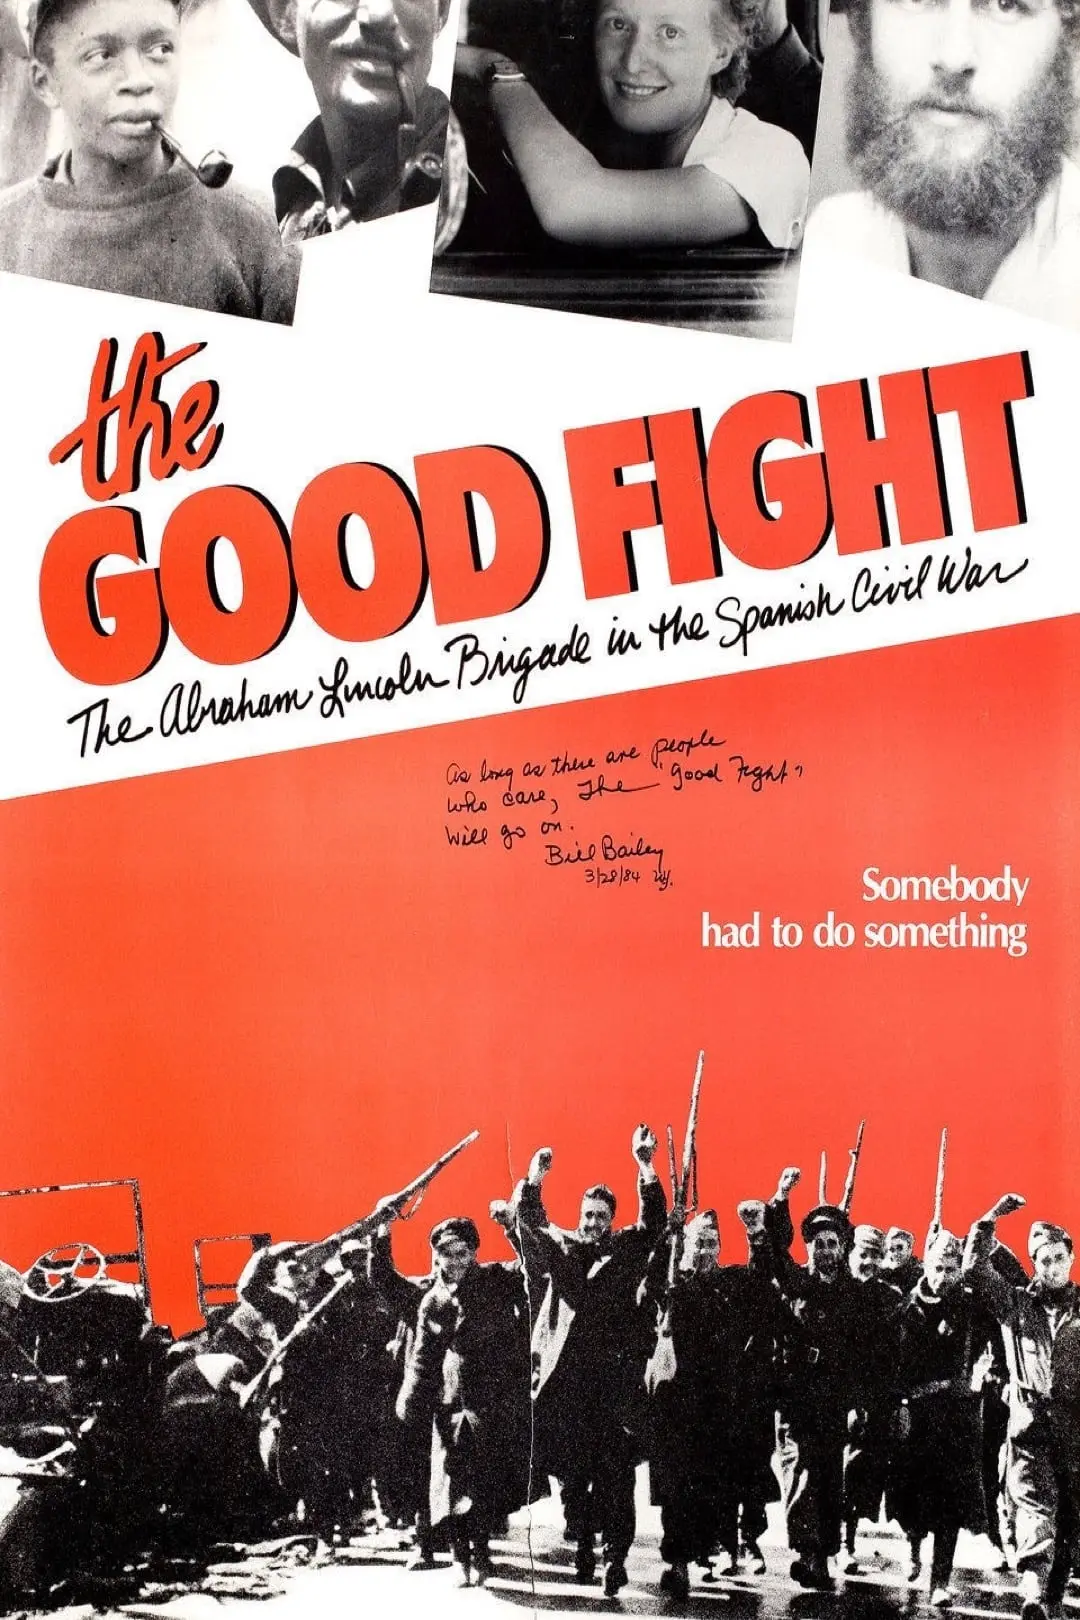 The Good Fight: The Abraham Lincoln Brigade in the Spanish Civil War_peliplat